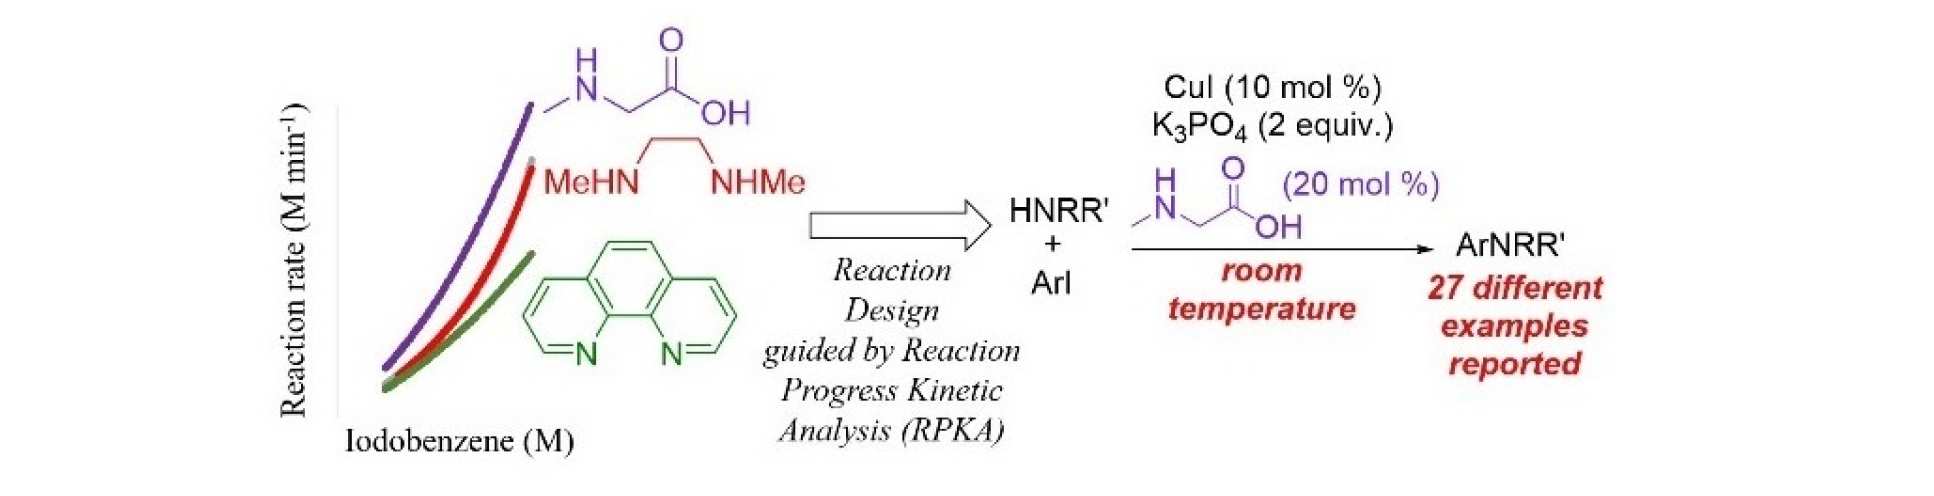 Summary scheme for paper: Mechanistic and Performance Studies on the Ligand-Promoted Ullmann Amination Reaction